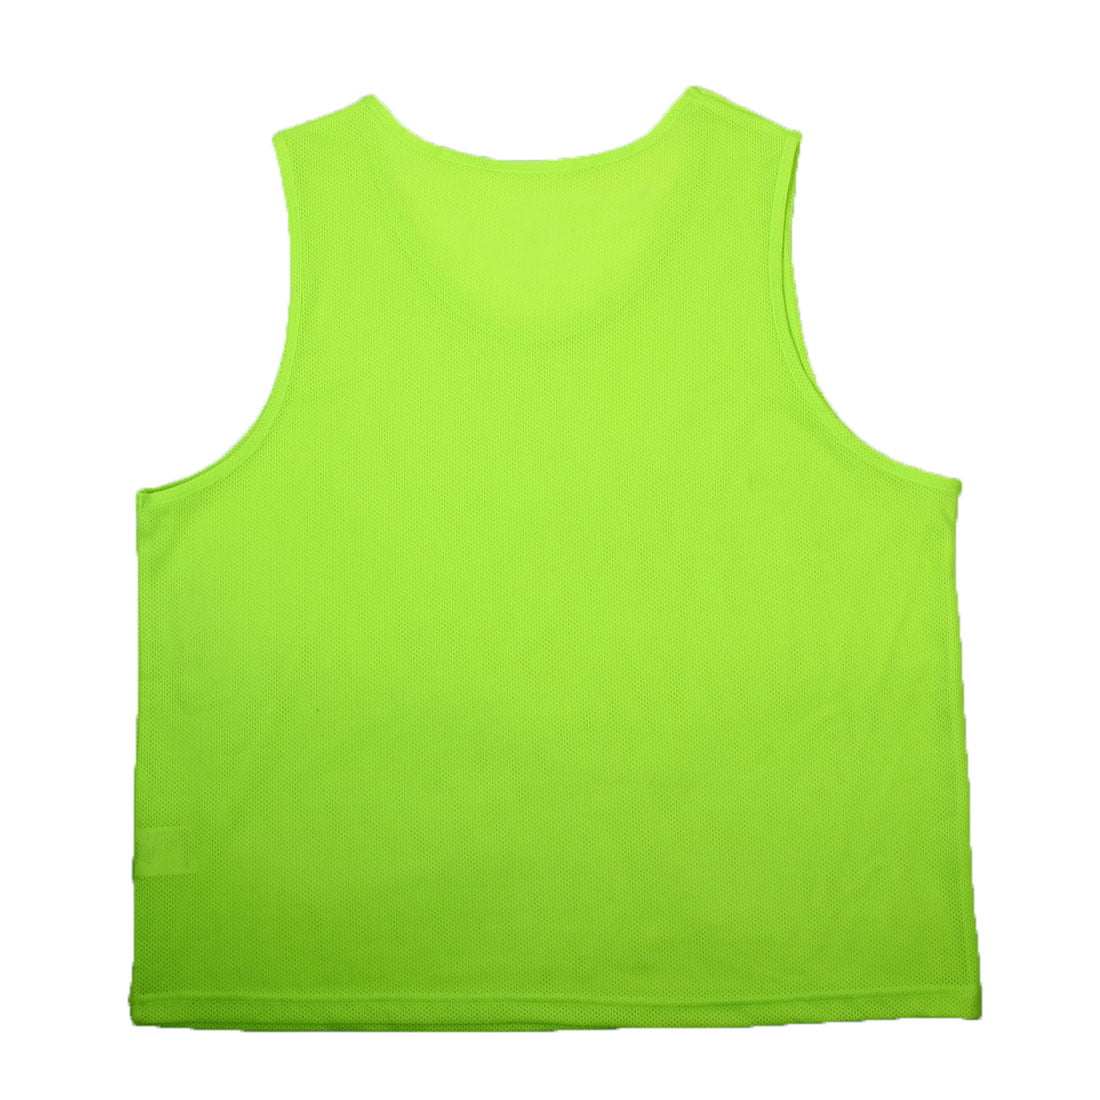 uxcell Adult Outdoor Exercise Breathable Soccer Bib Basketball Football Sports Training Vest 